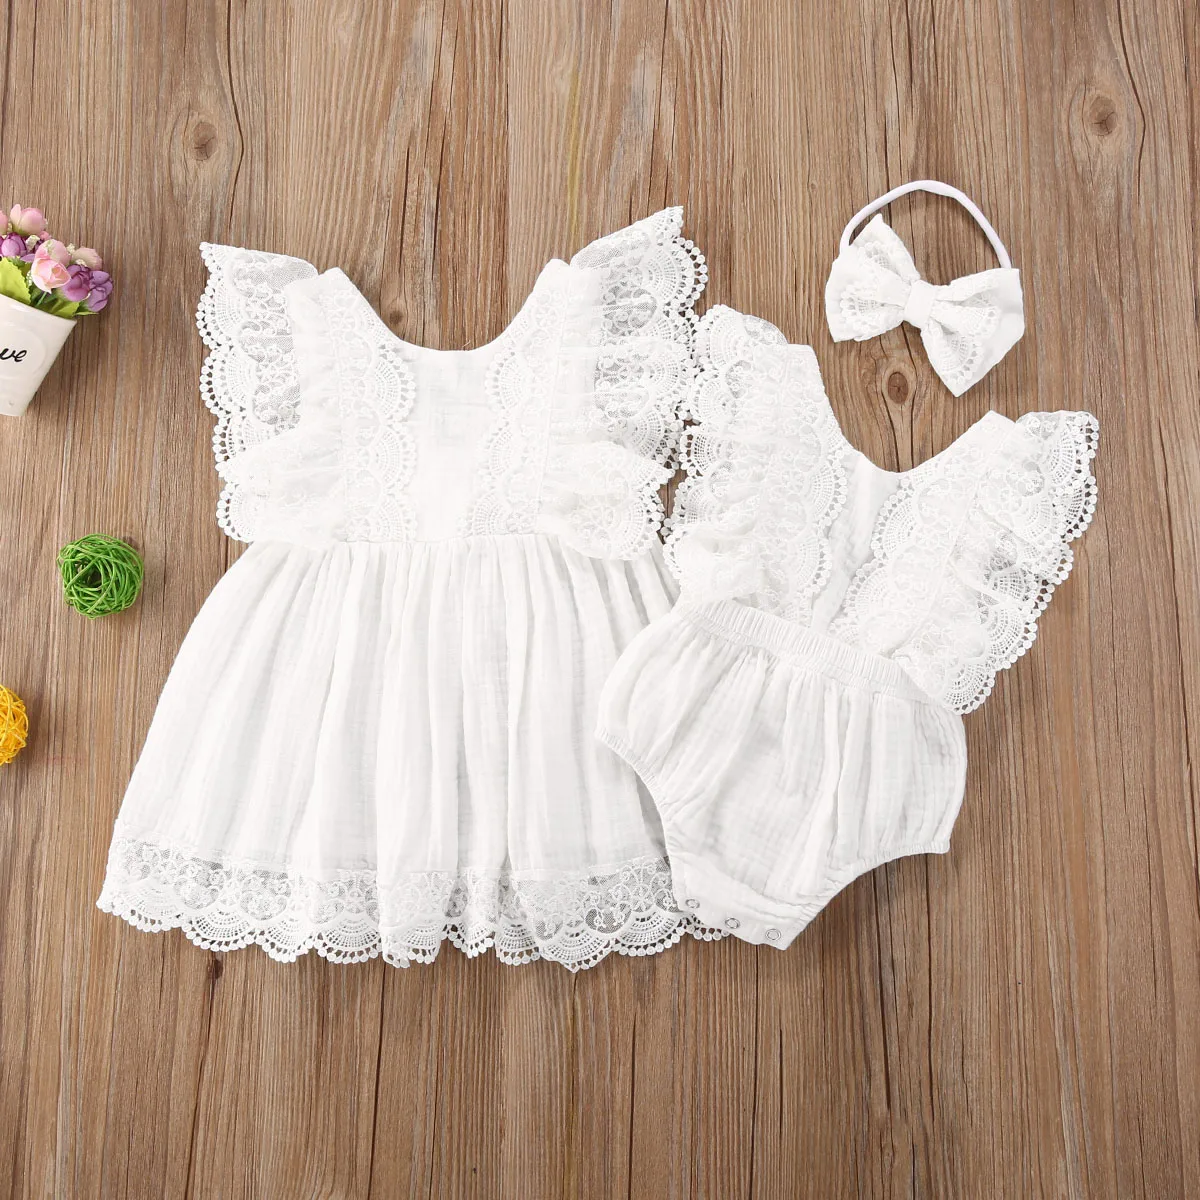 Citgeett Summer Matching Clothes Sisters Fly Sleeve Lace Romper+Headband 2-piece Outfit Set Fly Sleeve Lace White Dress